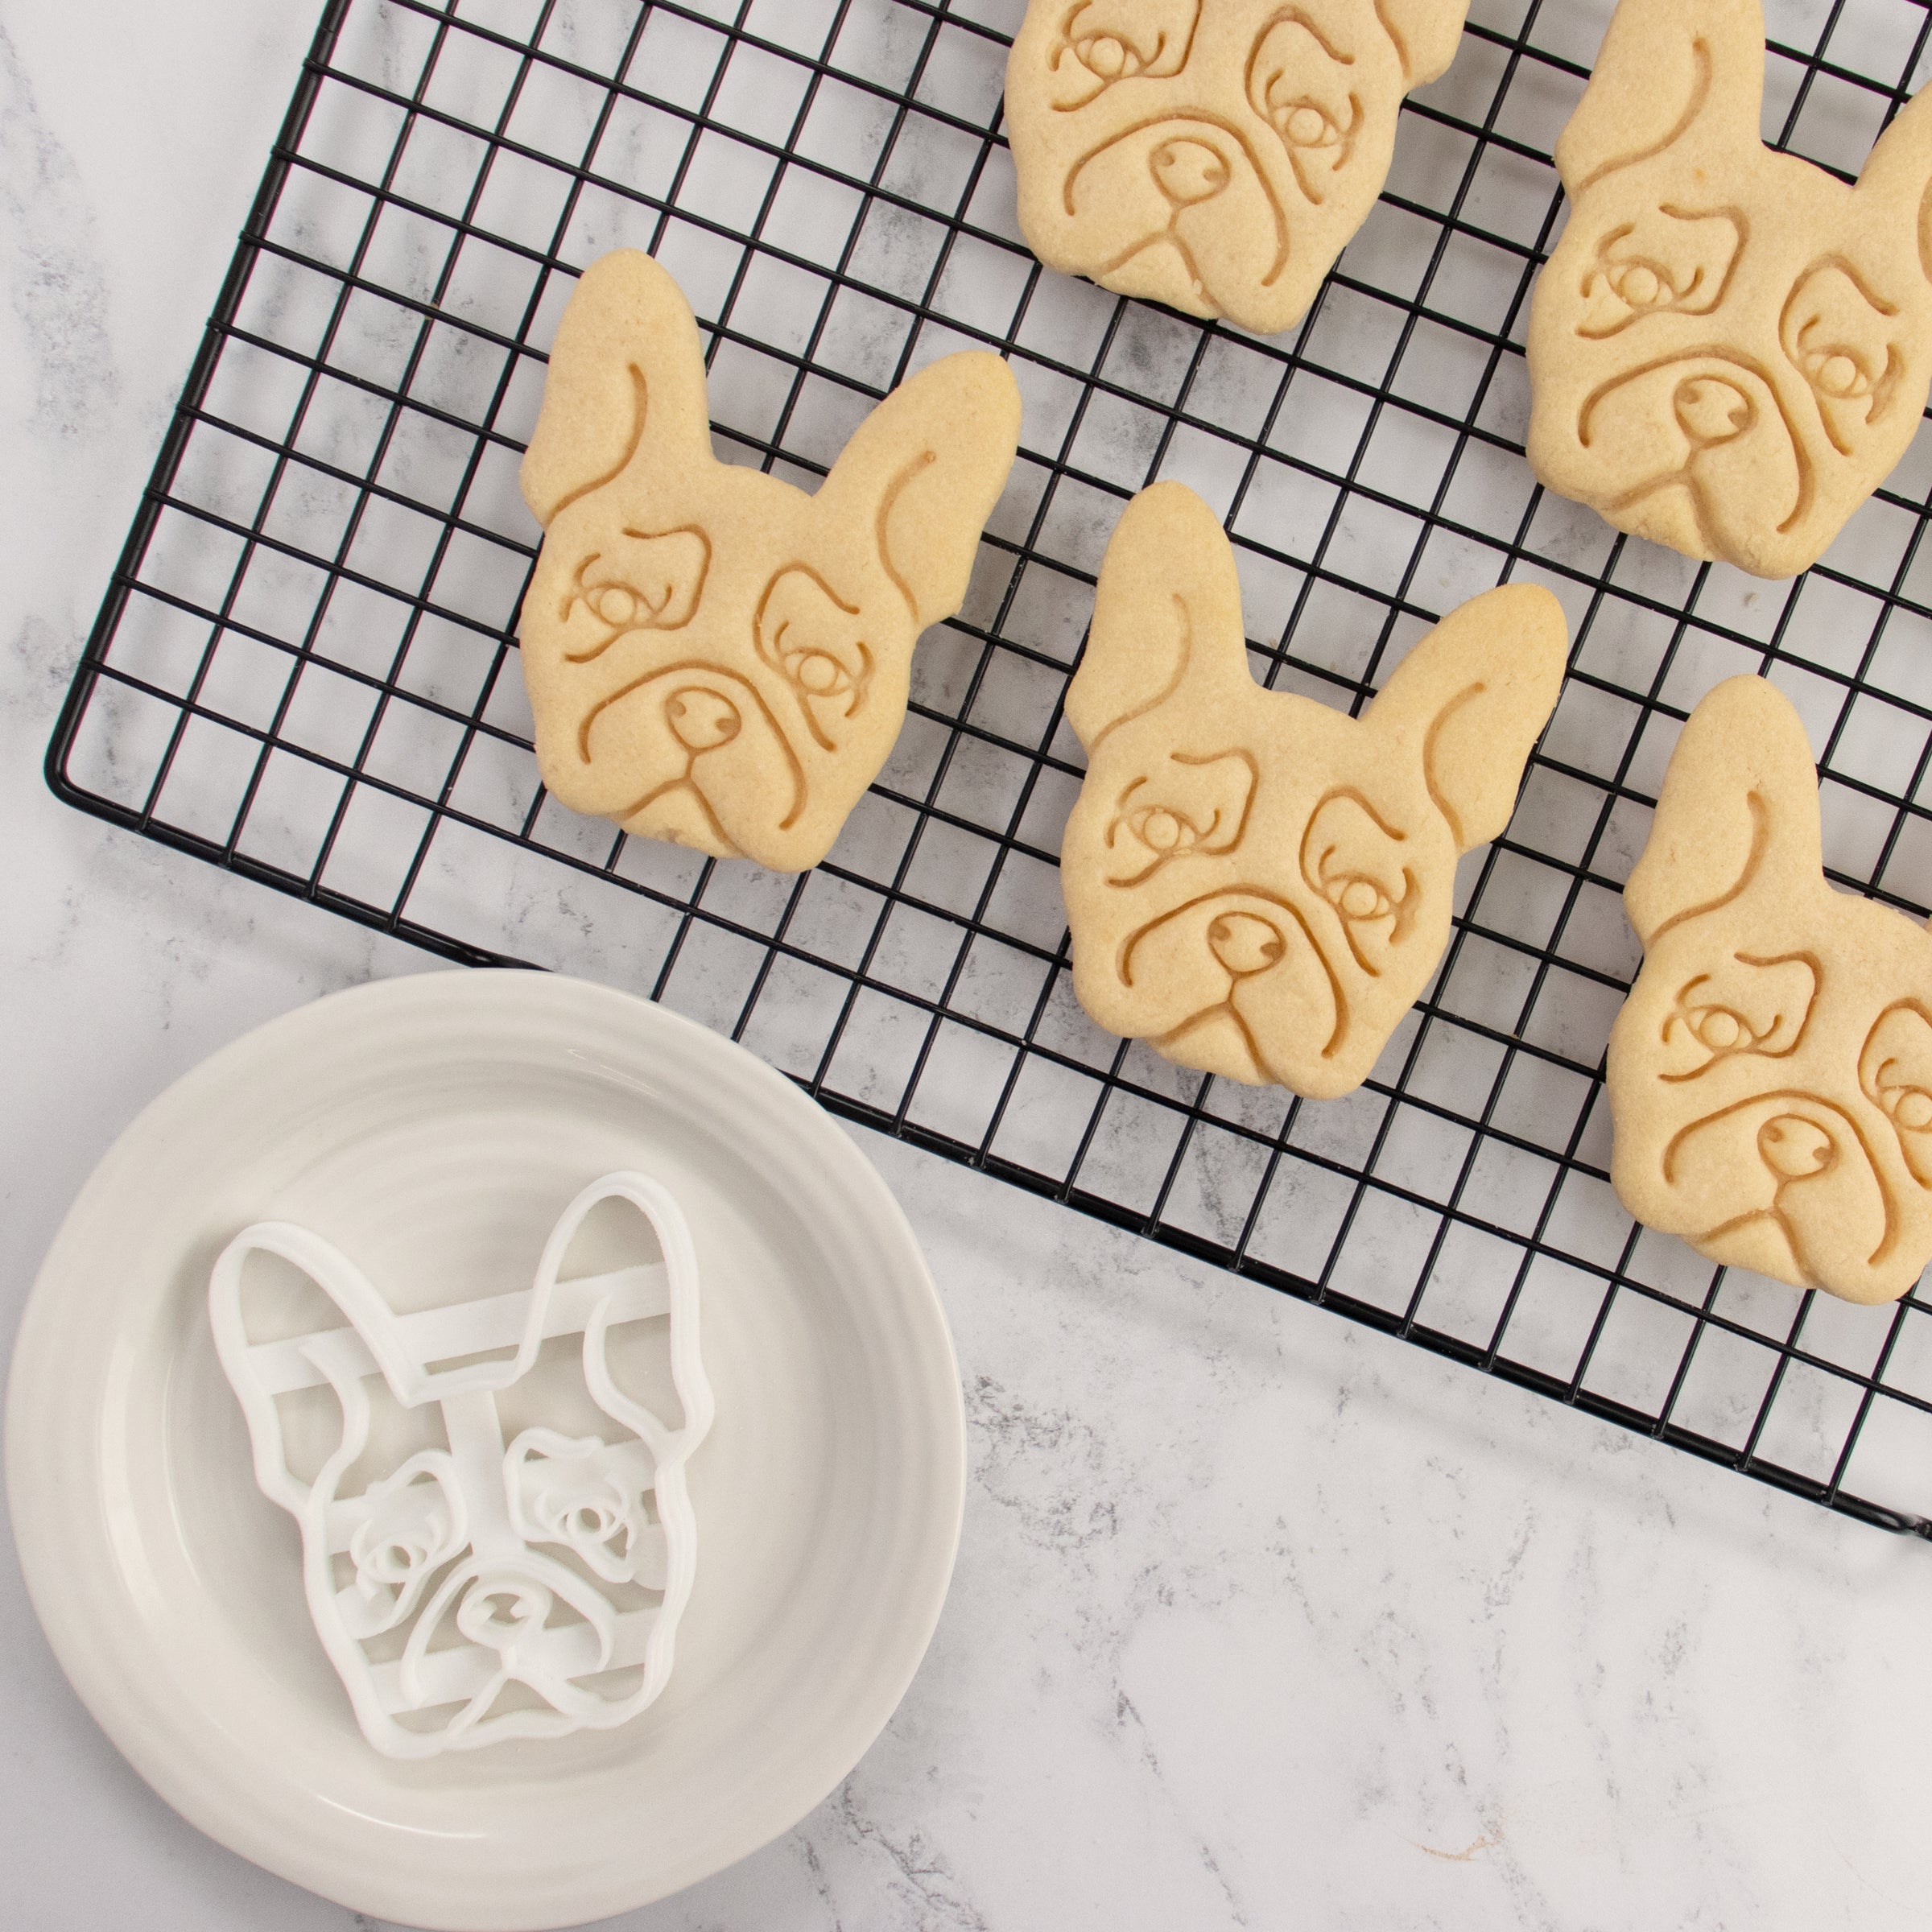 french bulldog face portrait cookies